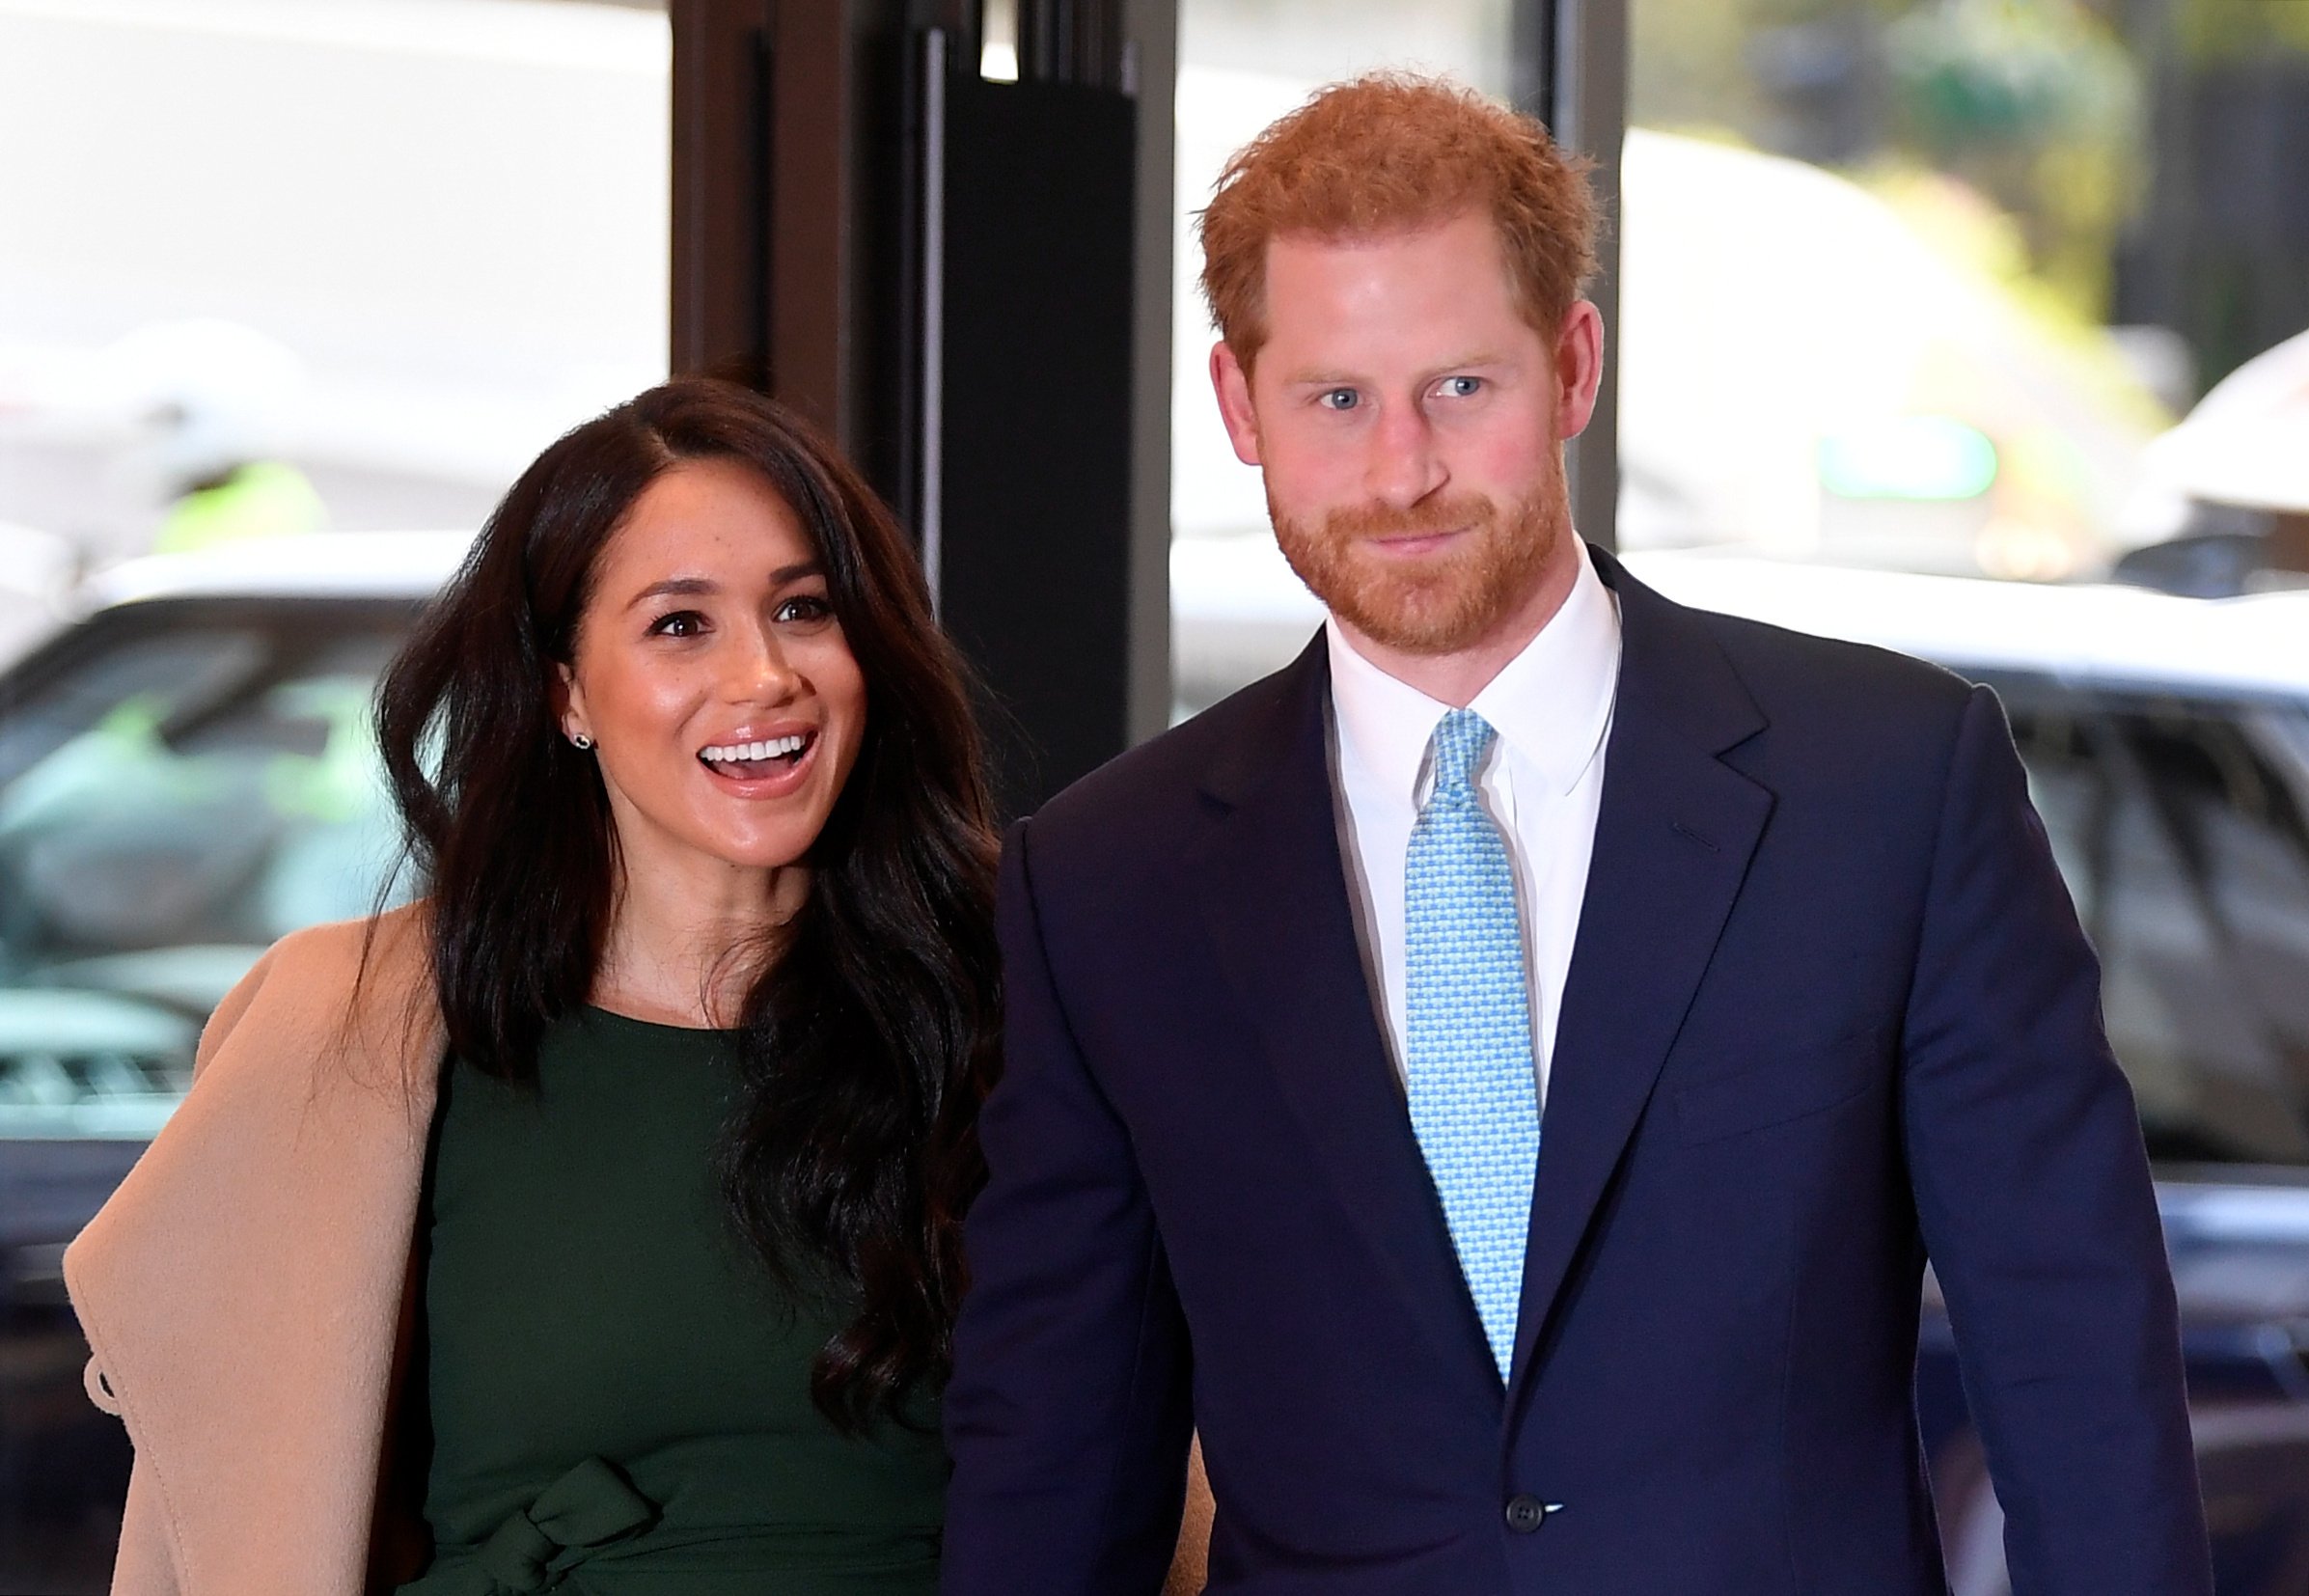 Meghan Markle and Prince Harry’s Relationship With the Royal Family ‘Hasn’t Improved’ Since the Death of Queen Elizabeth Says Royal Expert